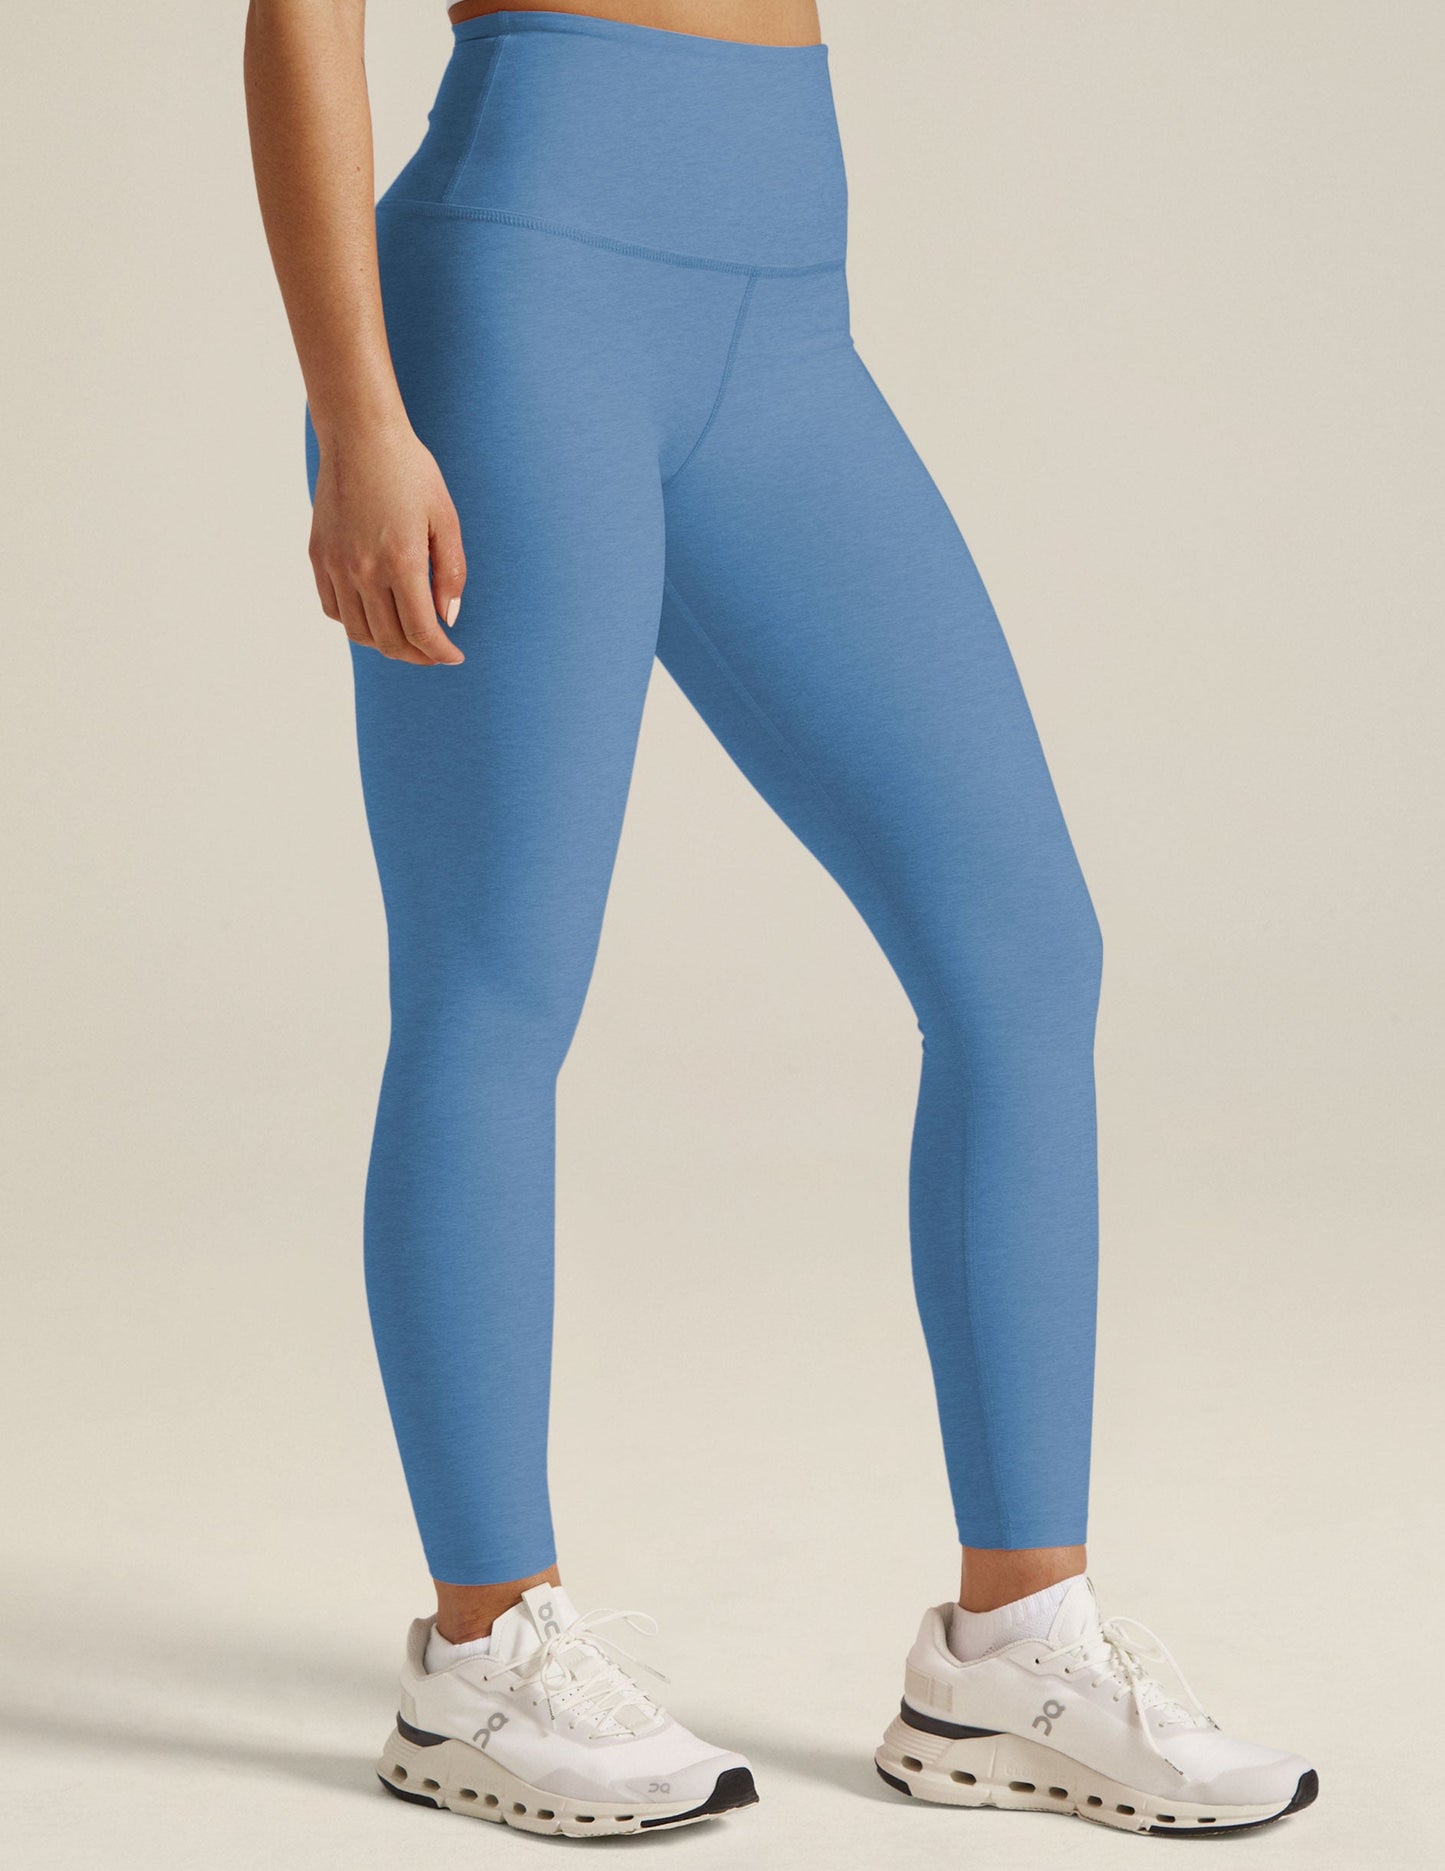 BEYOND YOGA CAUGHT IN THE MIDI HIGH WAISTED LEGGING SKY BLUE HEATHER